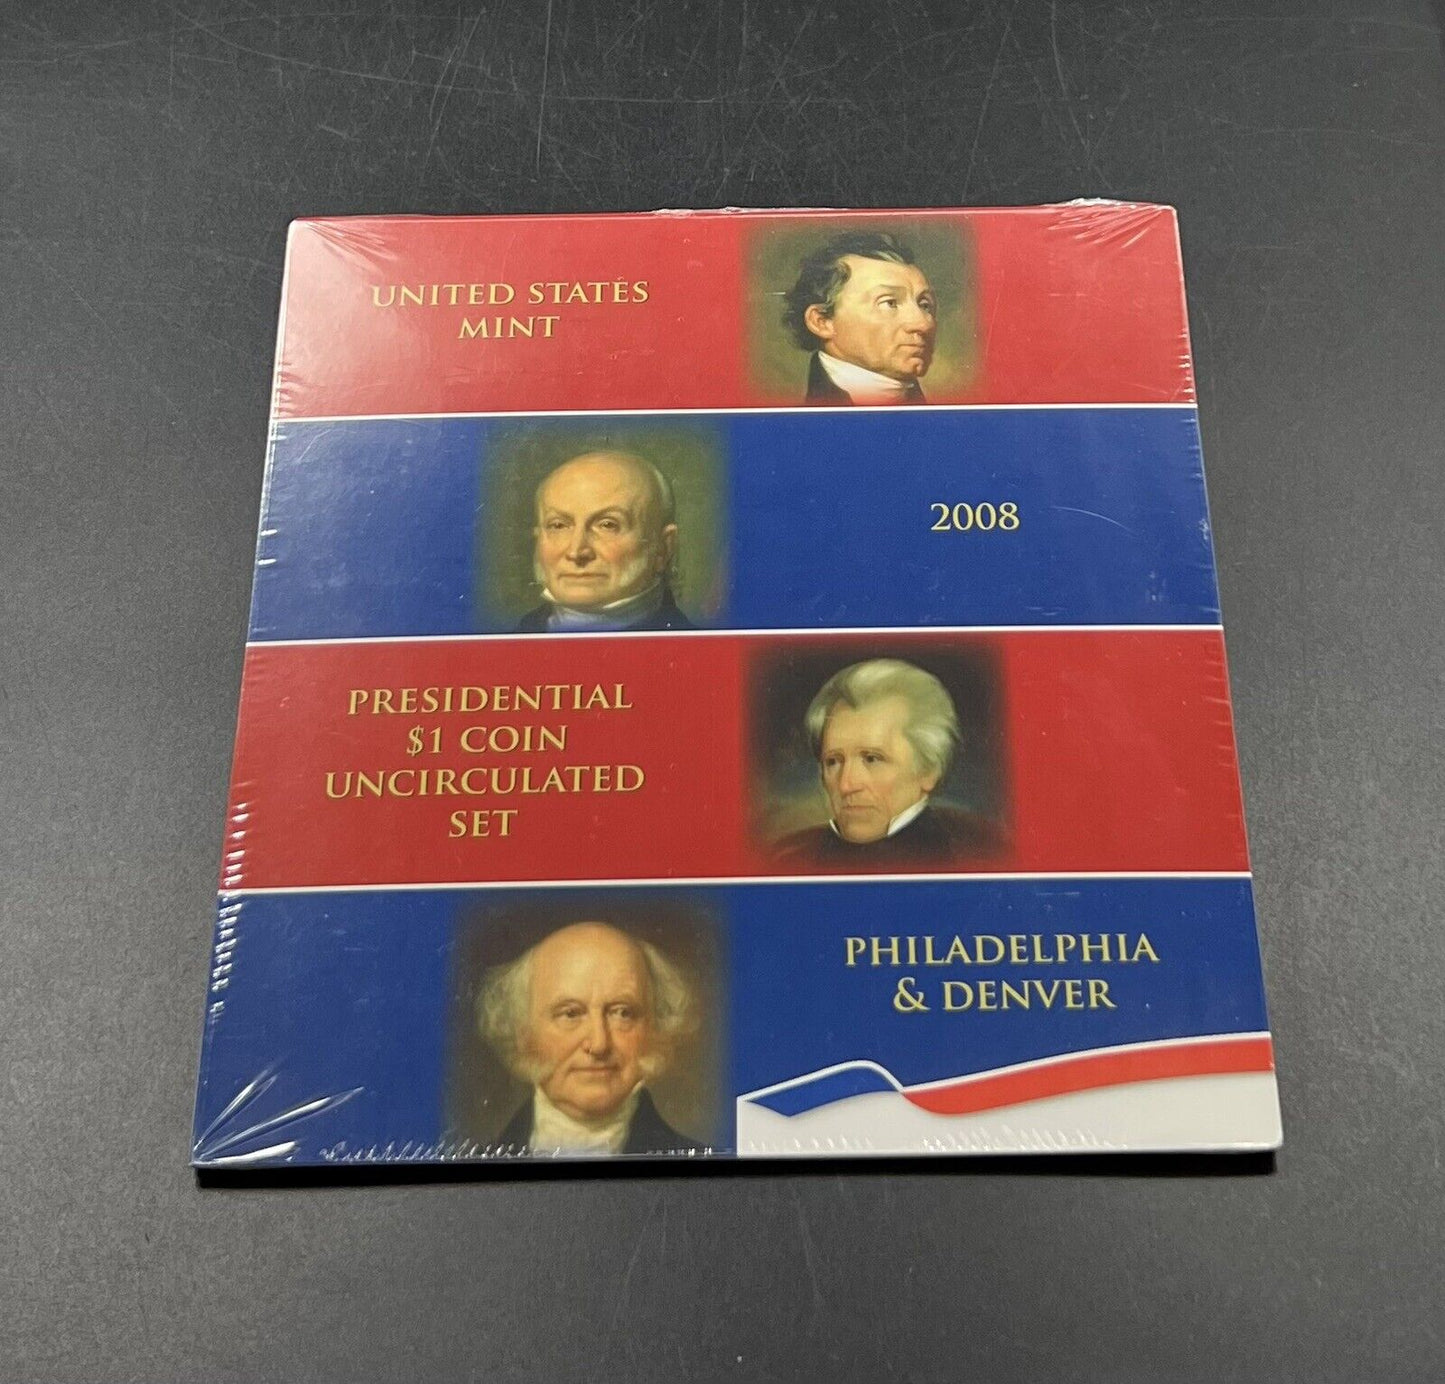 2008 P & D United States Mint Presidential $1 Coin UNC Set